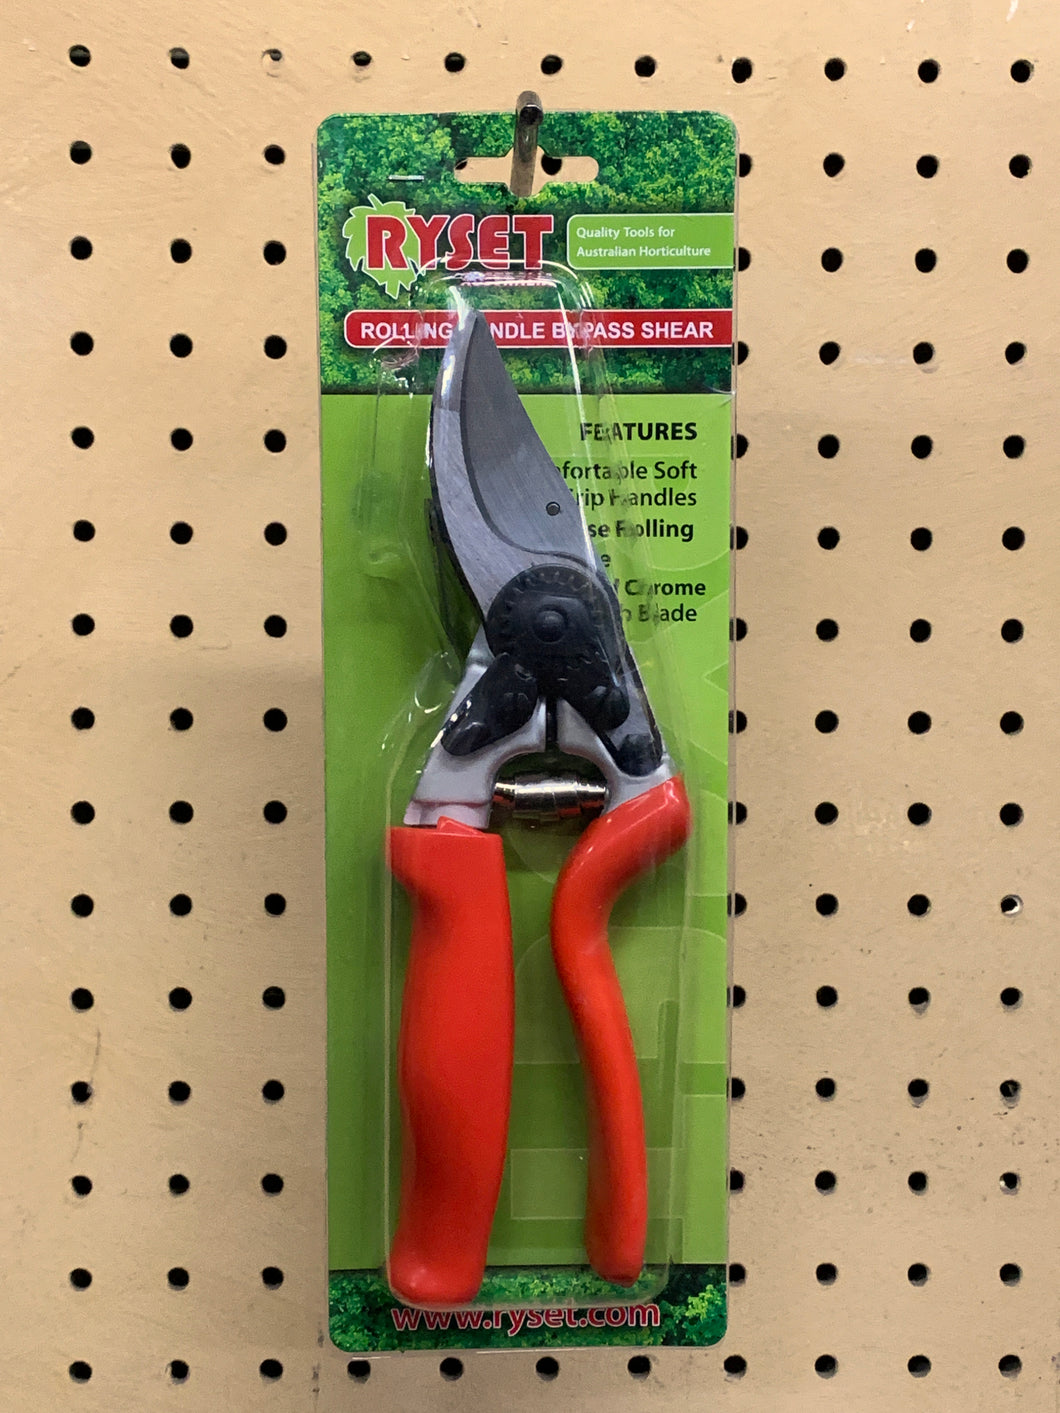 Ryset Rolling Handle Bypass Shear